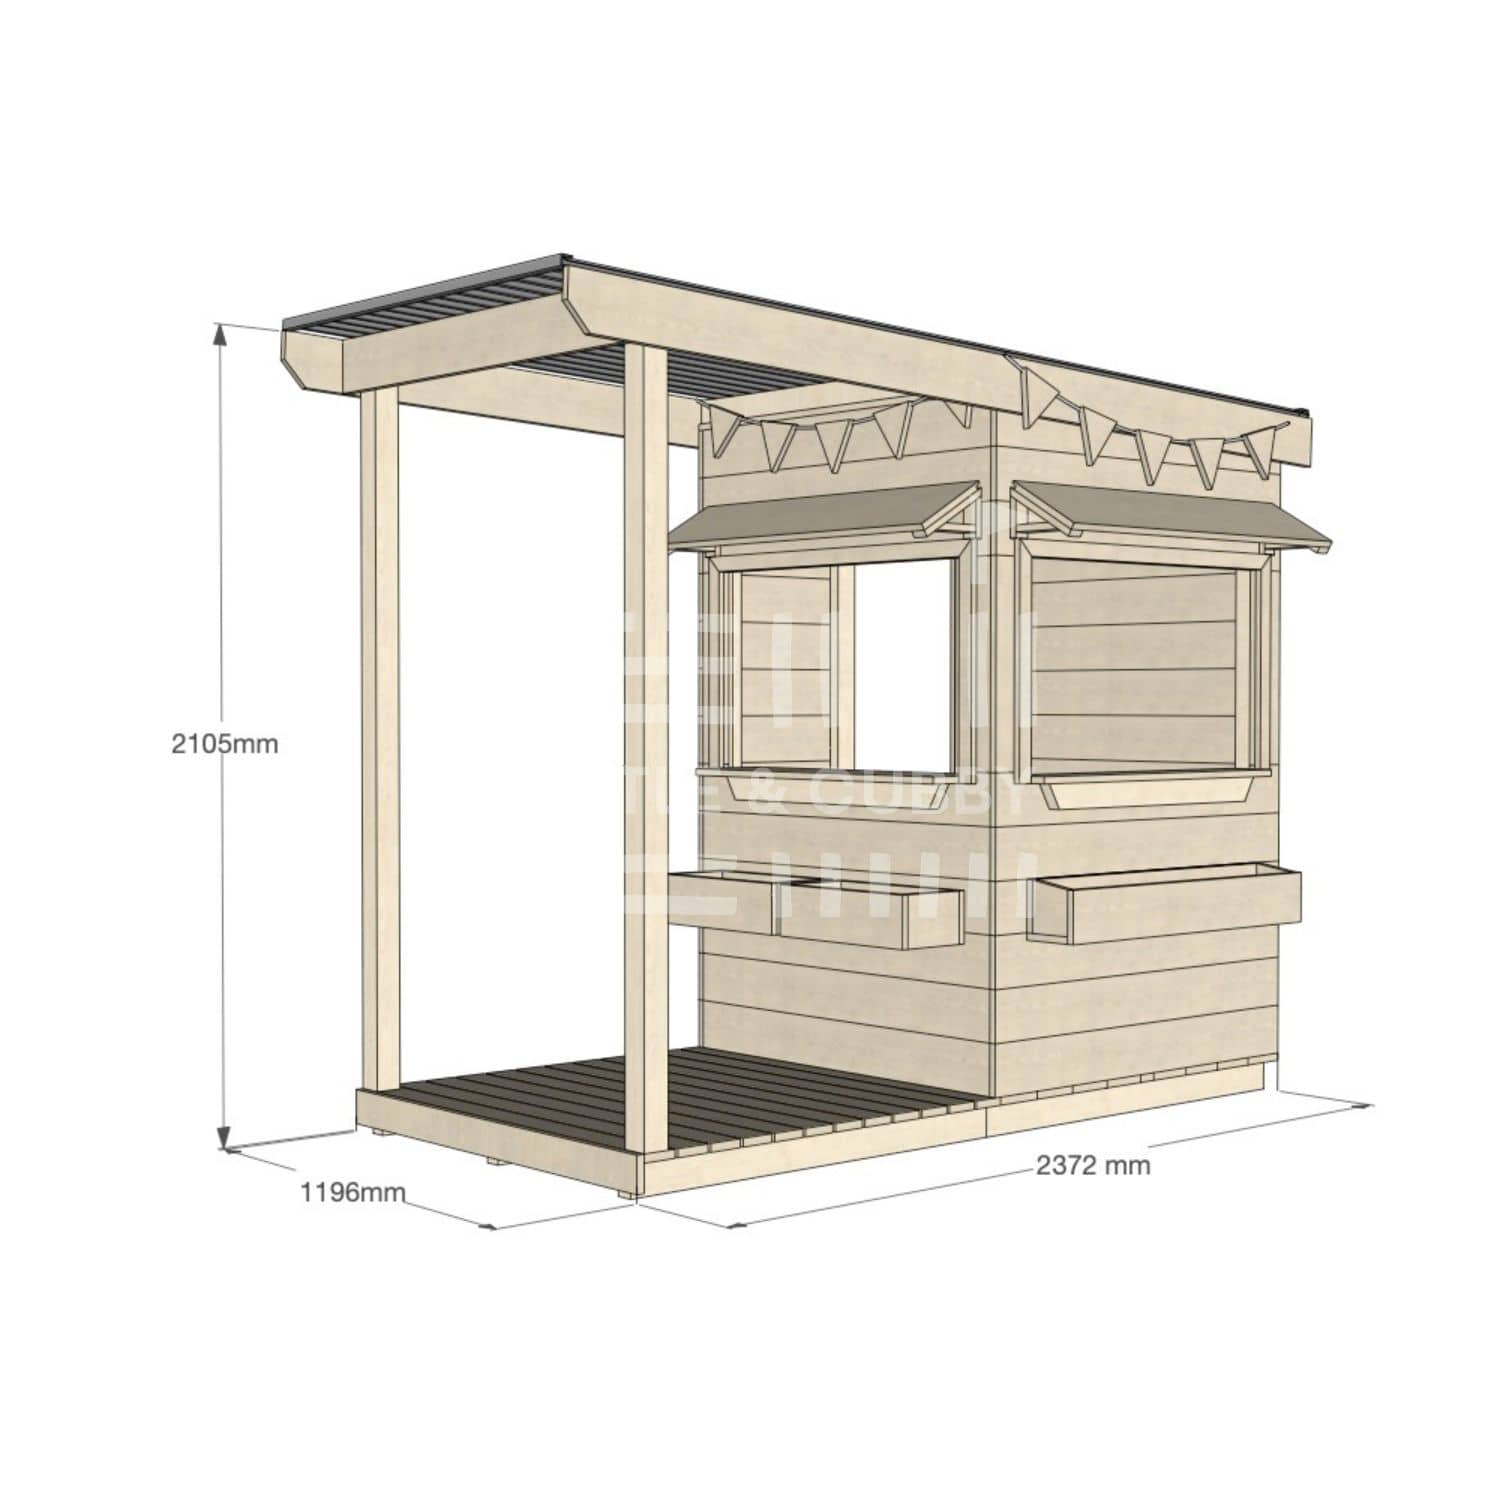 A commercial grade extended height pine little square cubby house with front verandah, accessories and dimensions